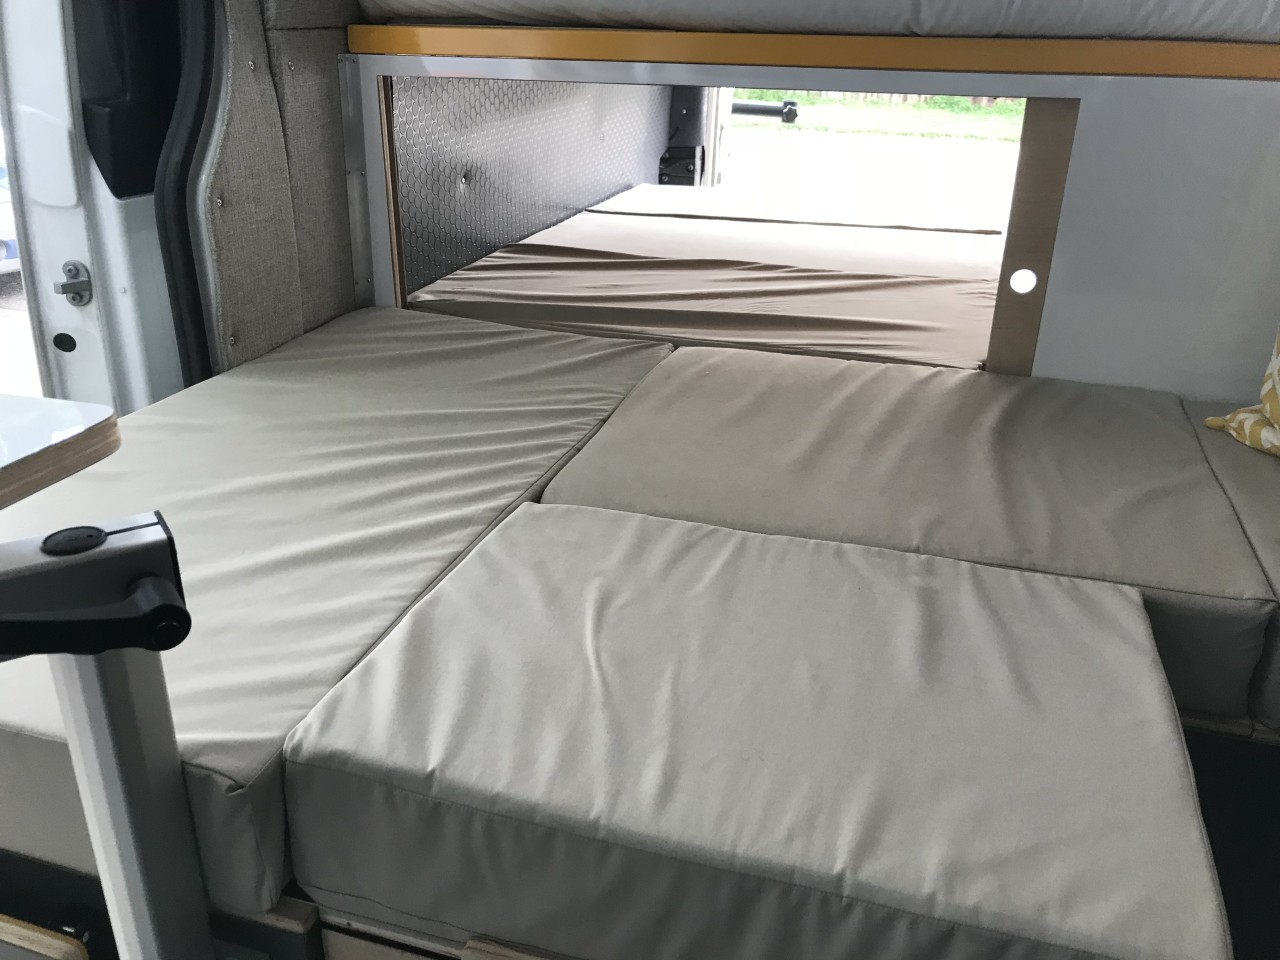 The single bed offers plenty of length for a full adult